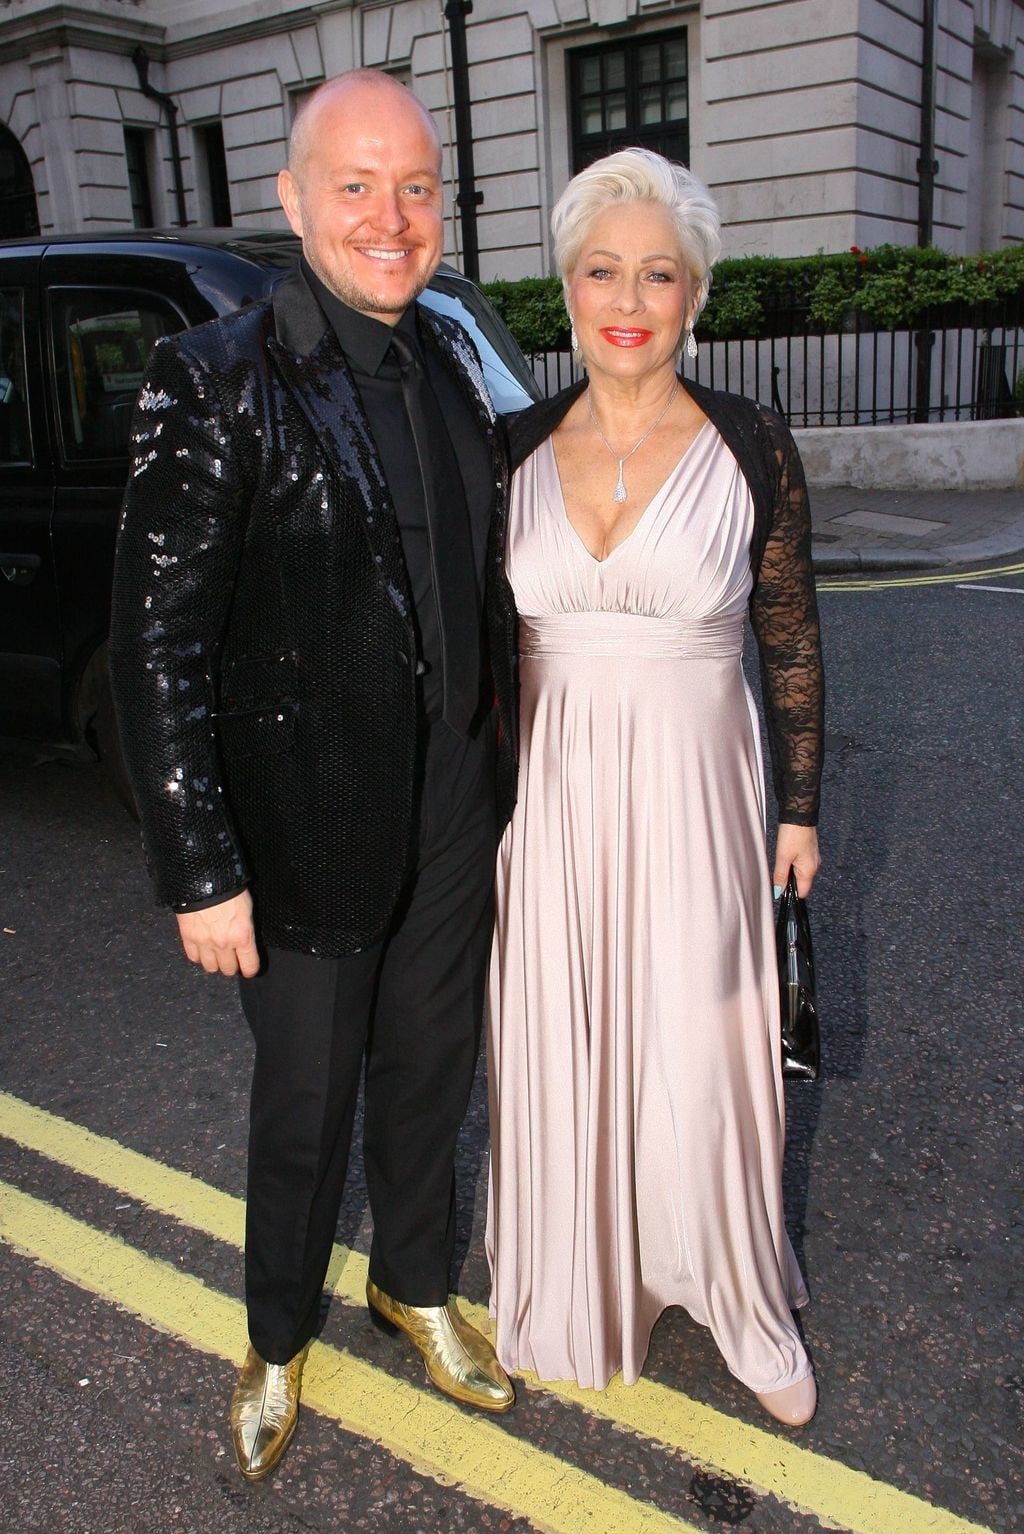 Denise Welch in a satin cream dress with Lincoln Townley in a sequin blazer in the street